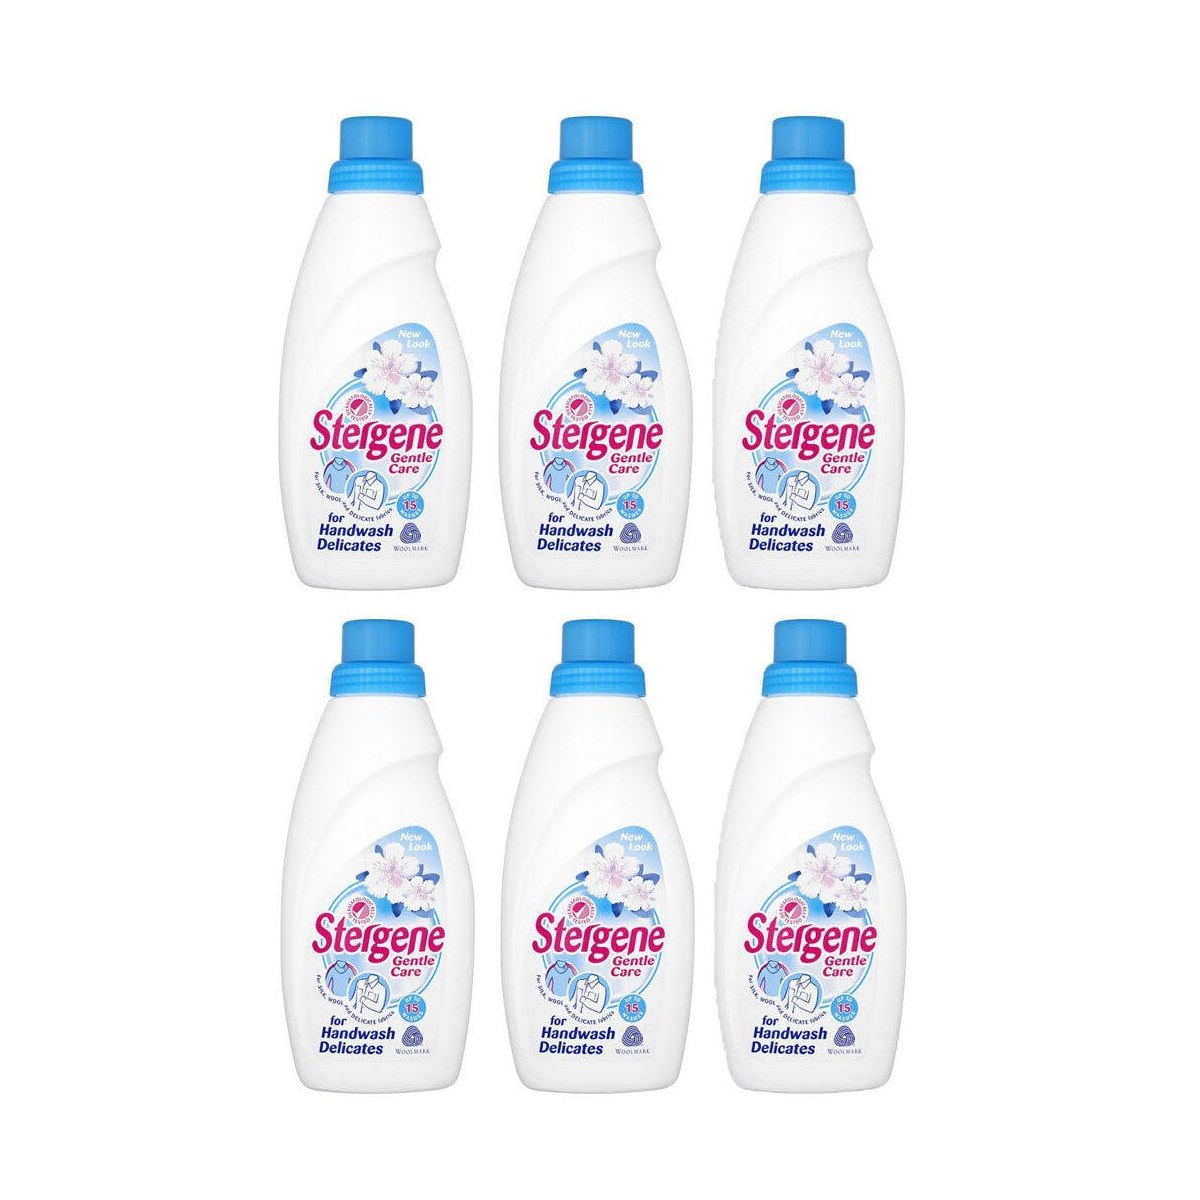 Case of 6 x Stergene Gentle Care Handwash for Delicates 500ml